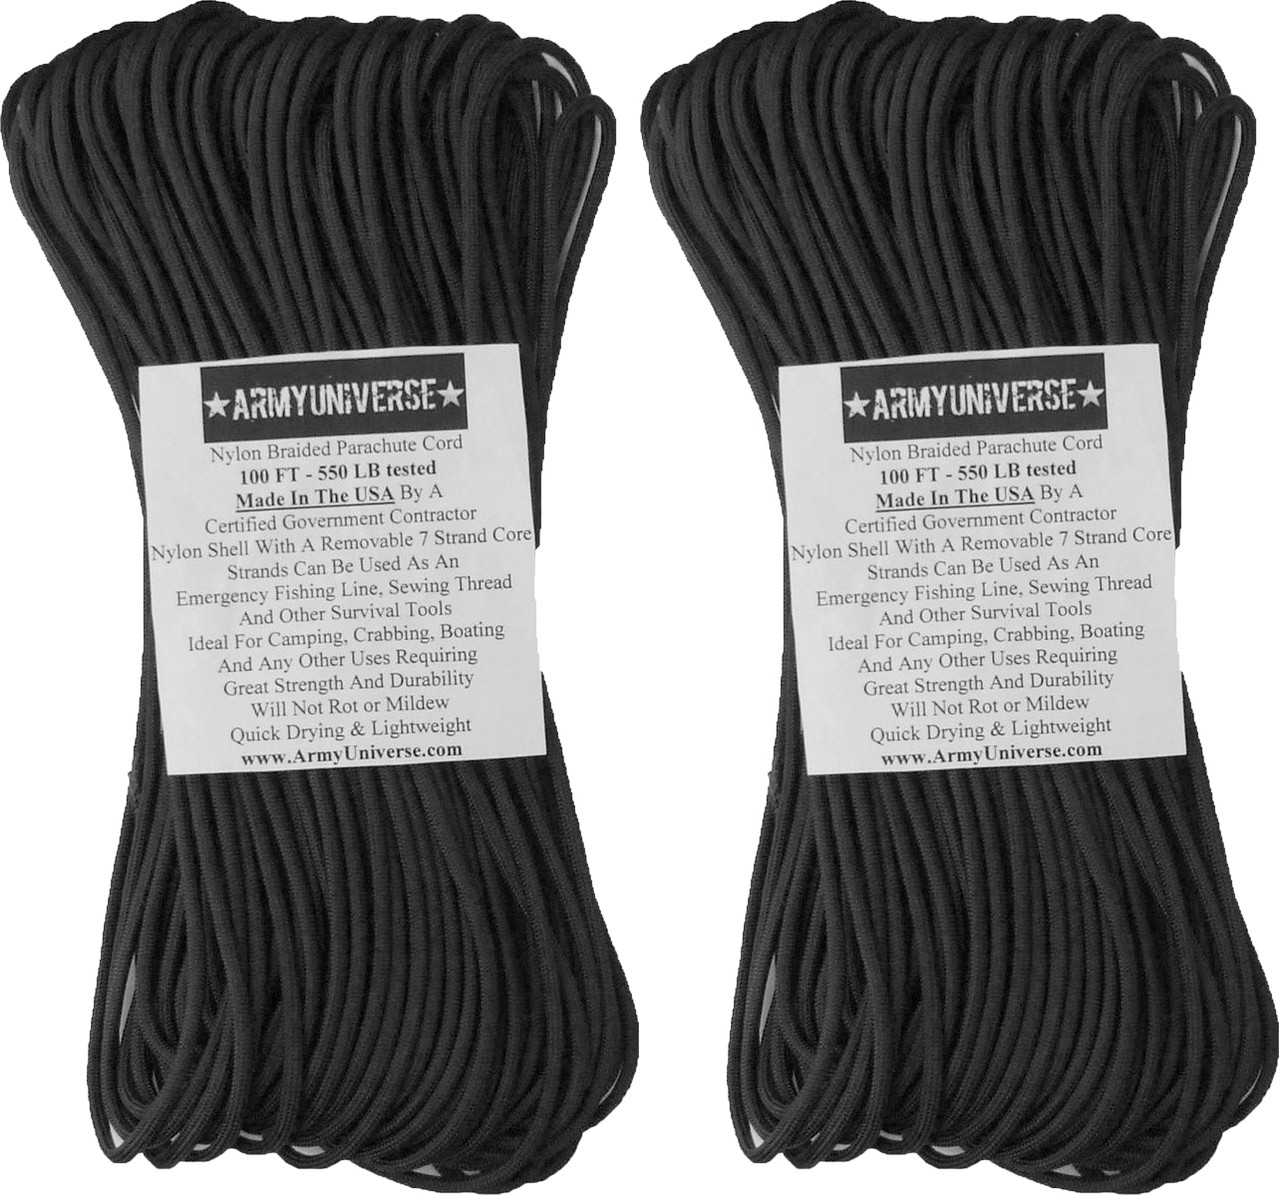 Army Universe Black 550lb Military Paracord Type III Rope 100' (2-Pack)